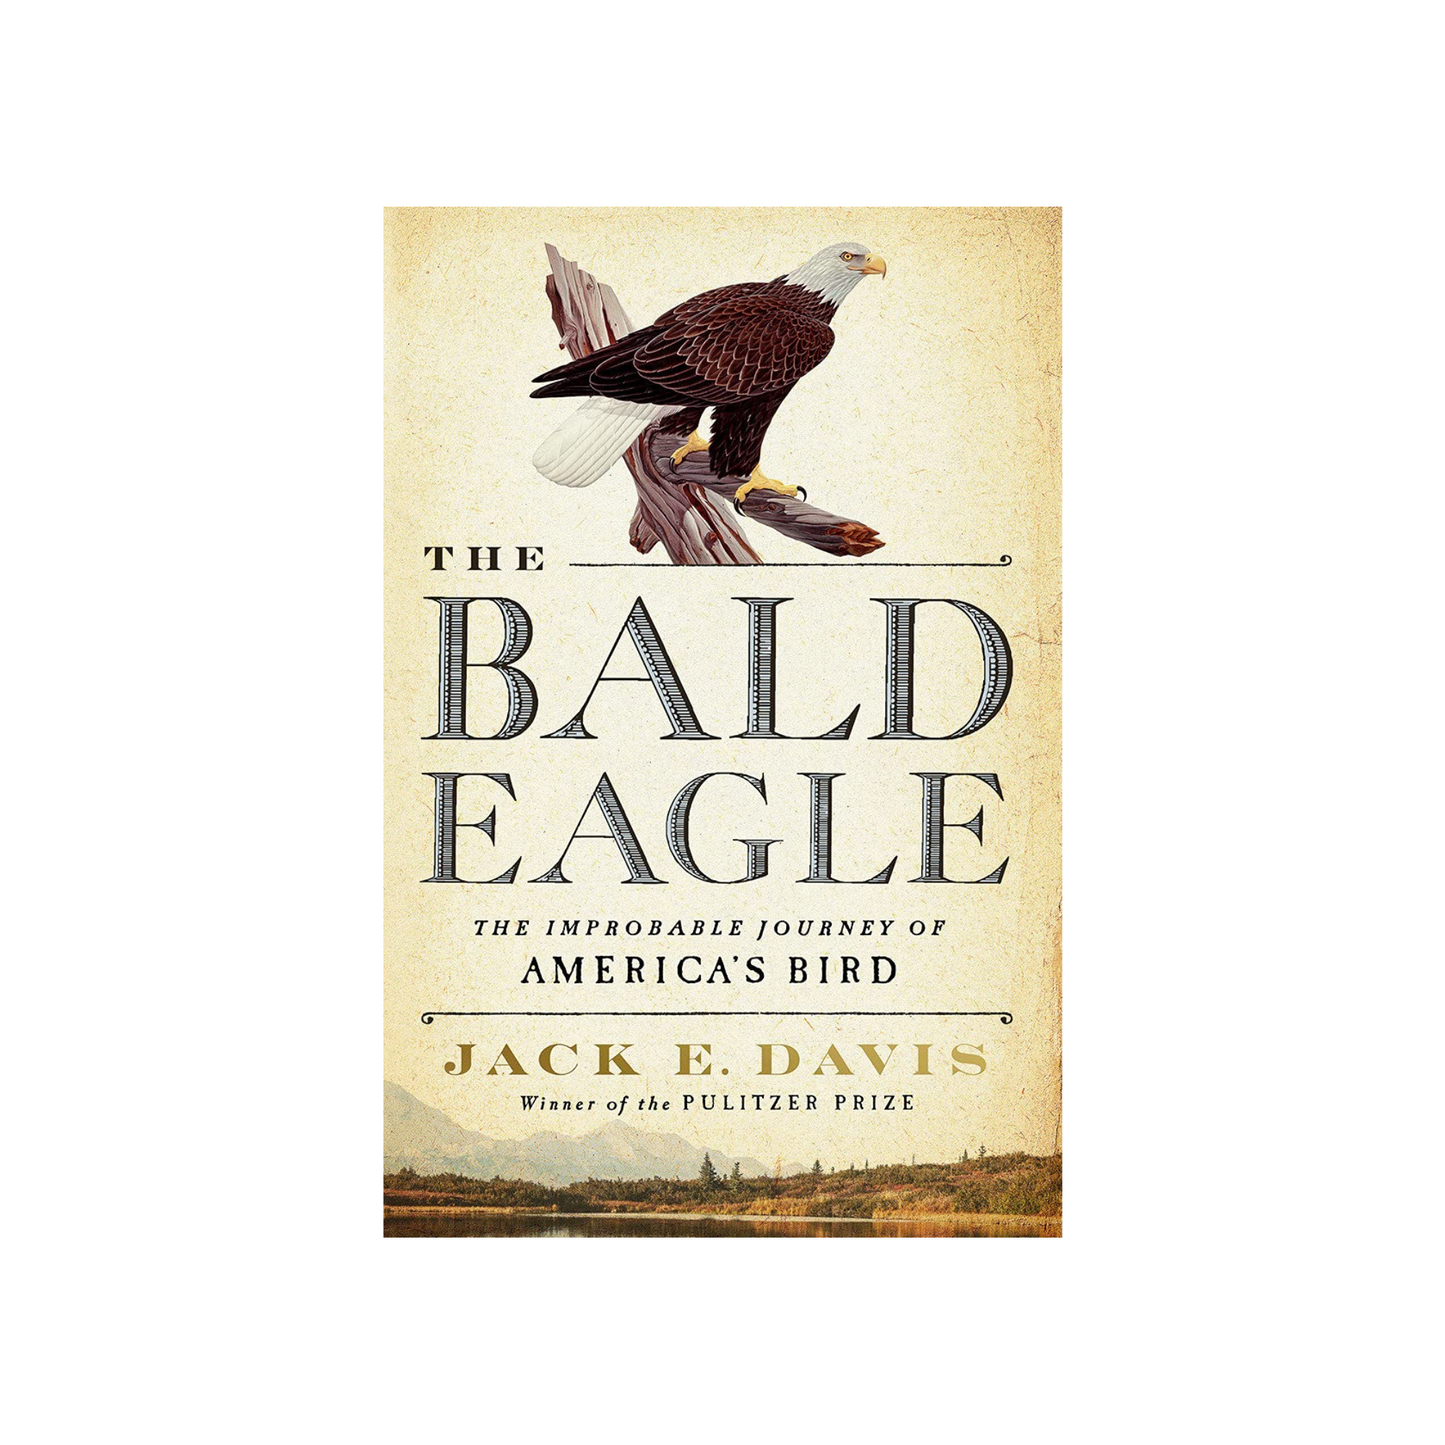 The Bald Eagle: The Improbable Journey of America's Bird (Hardcover)